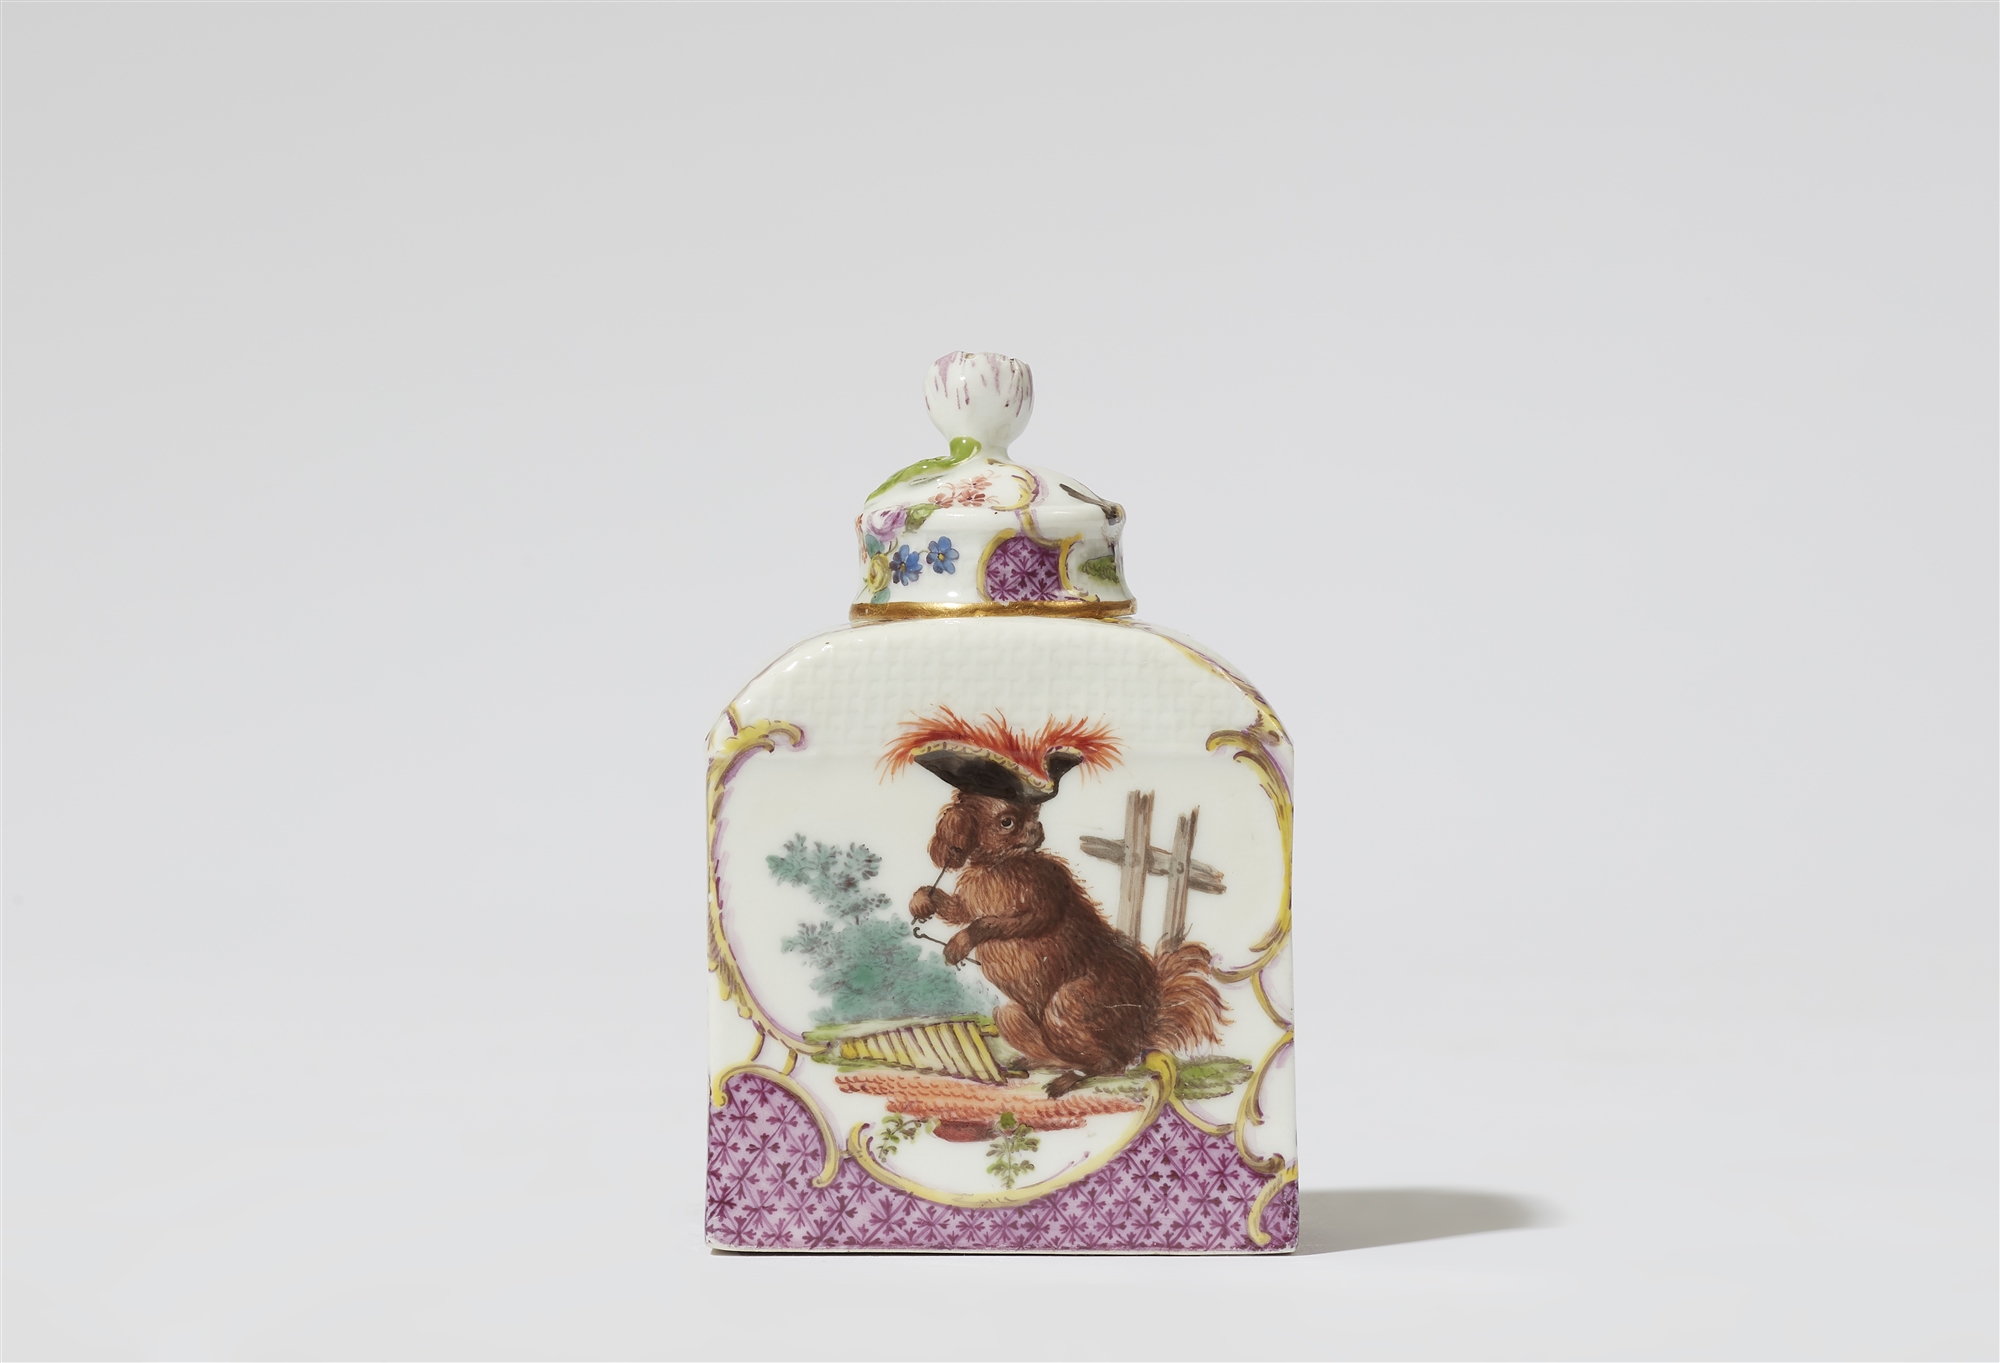 A Meissen porcelain tea caddy with a dog in a costume and poultry